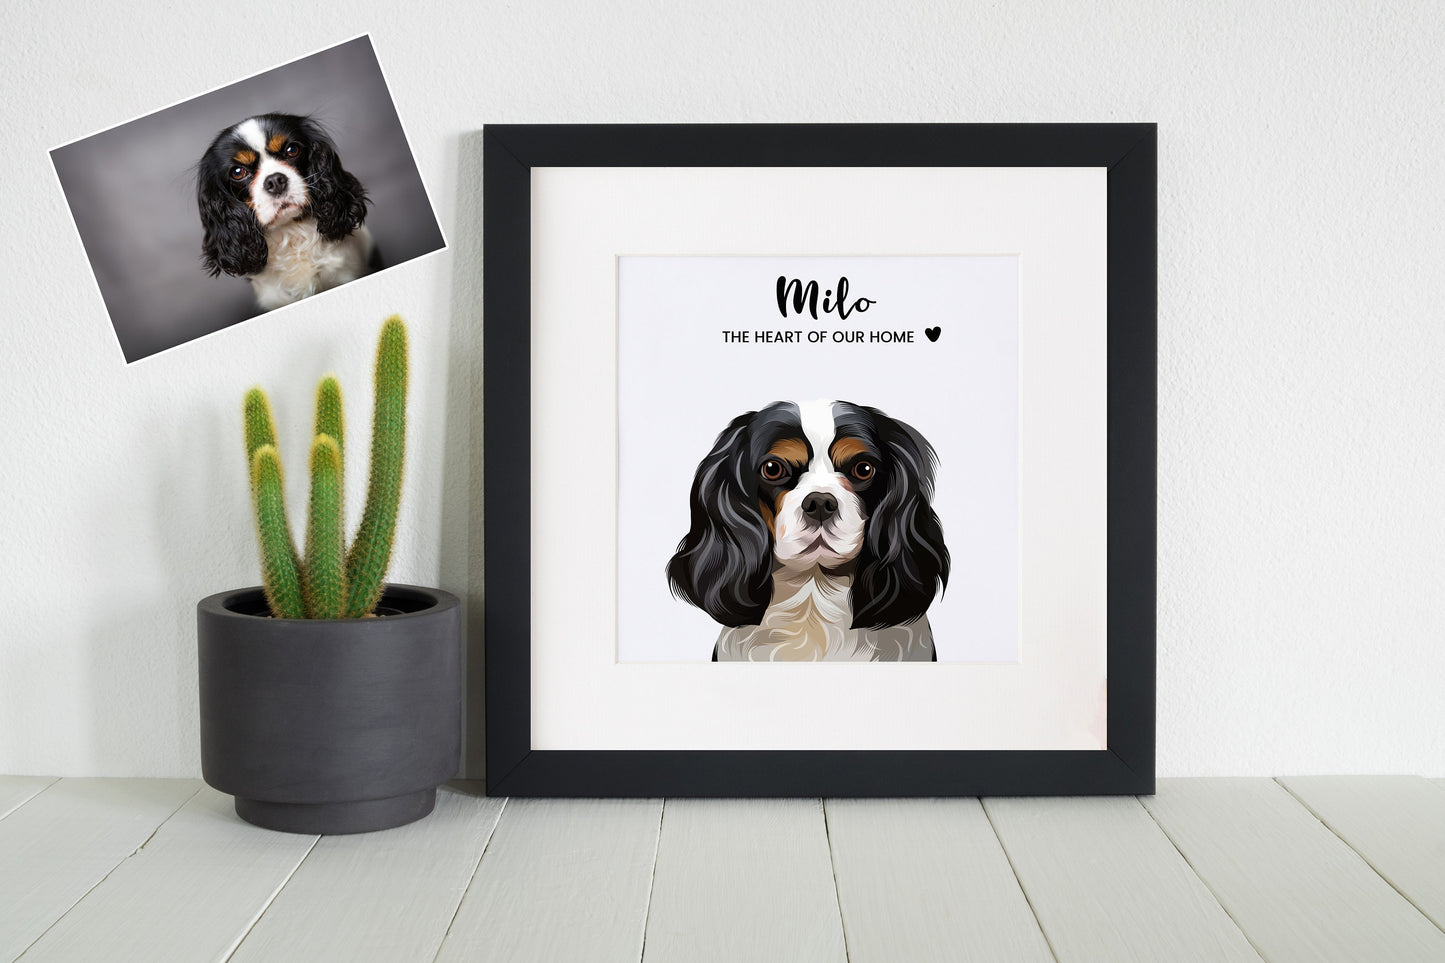 Personalised Framed Cat Photo Print